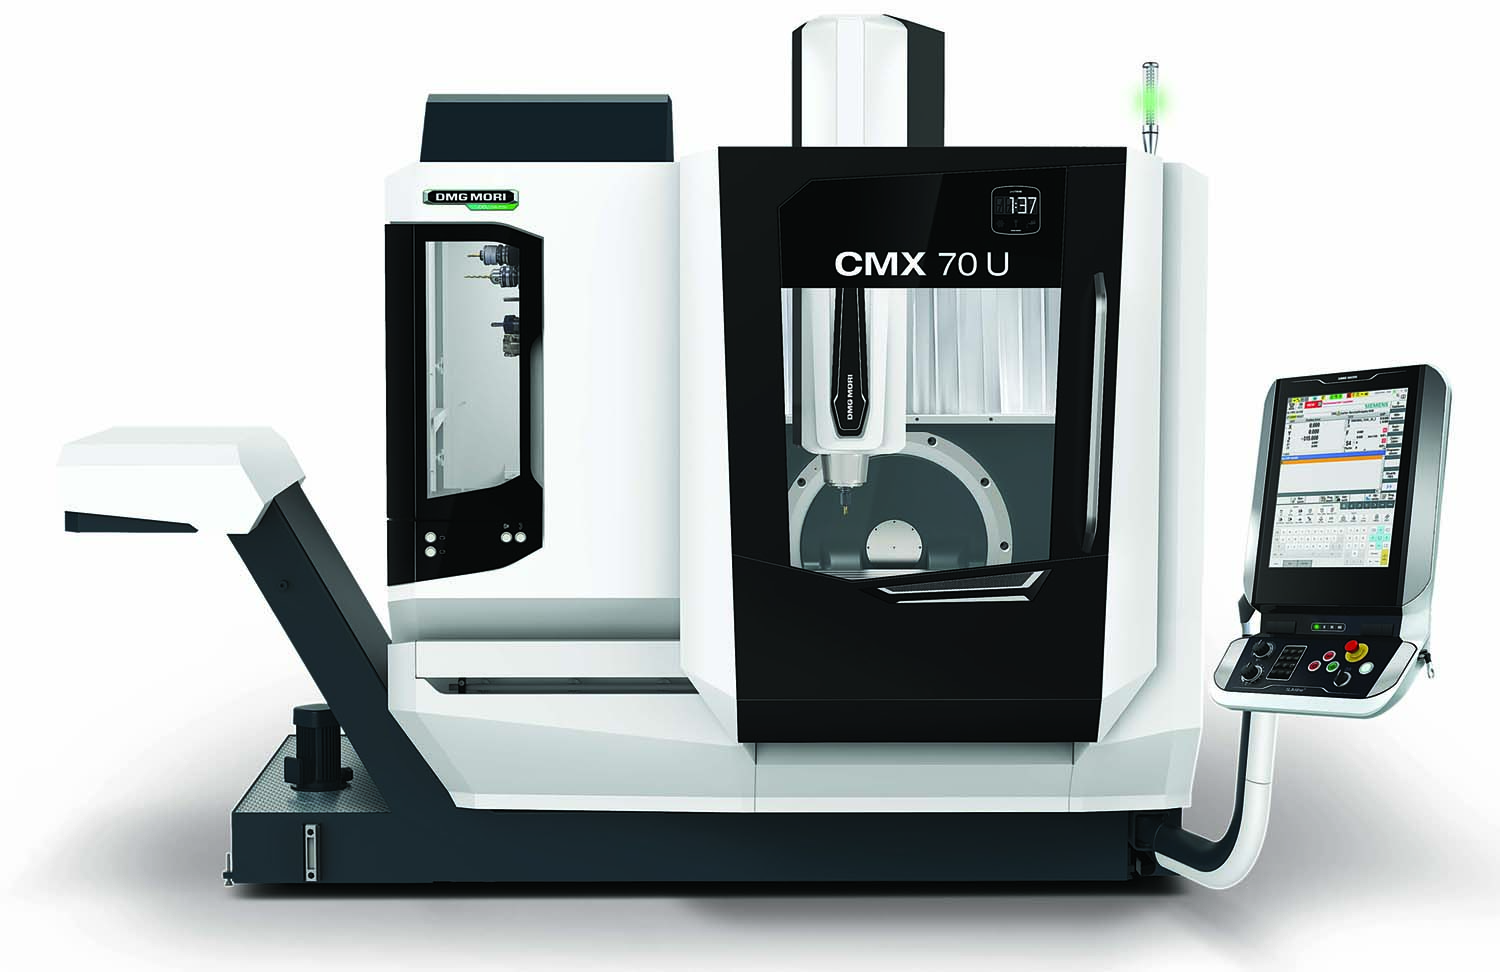 The CMX 70 U universal milling machine has a swivel rotary table to enable complete five-axis machining of complex parts.